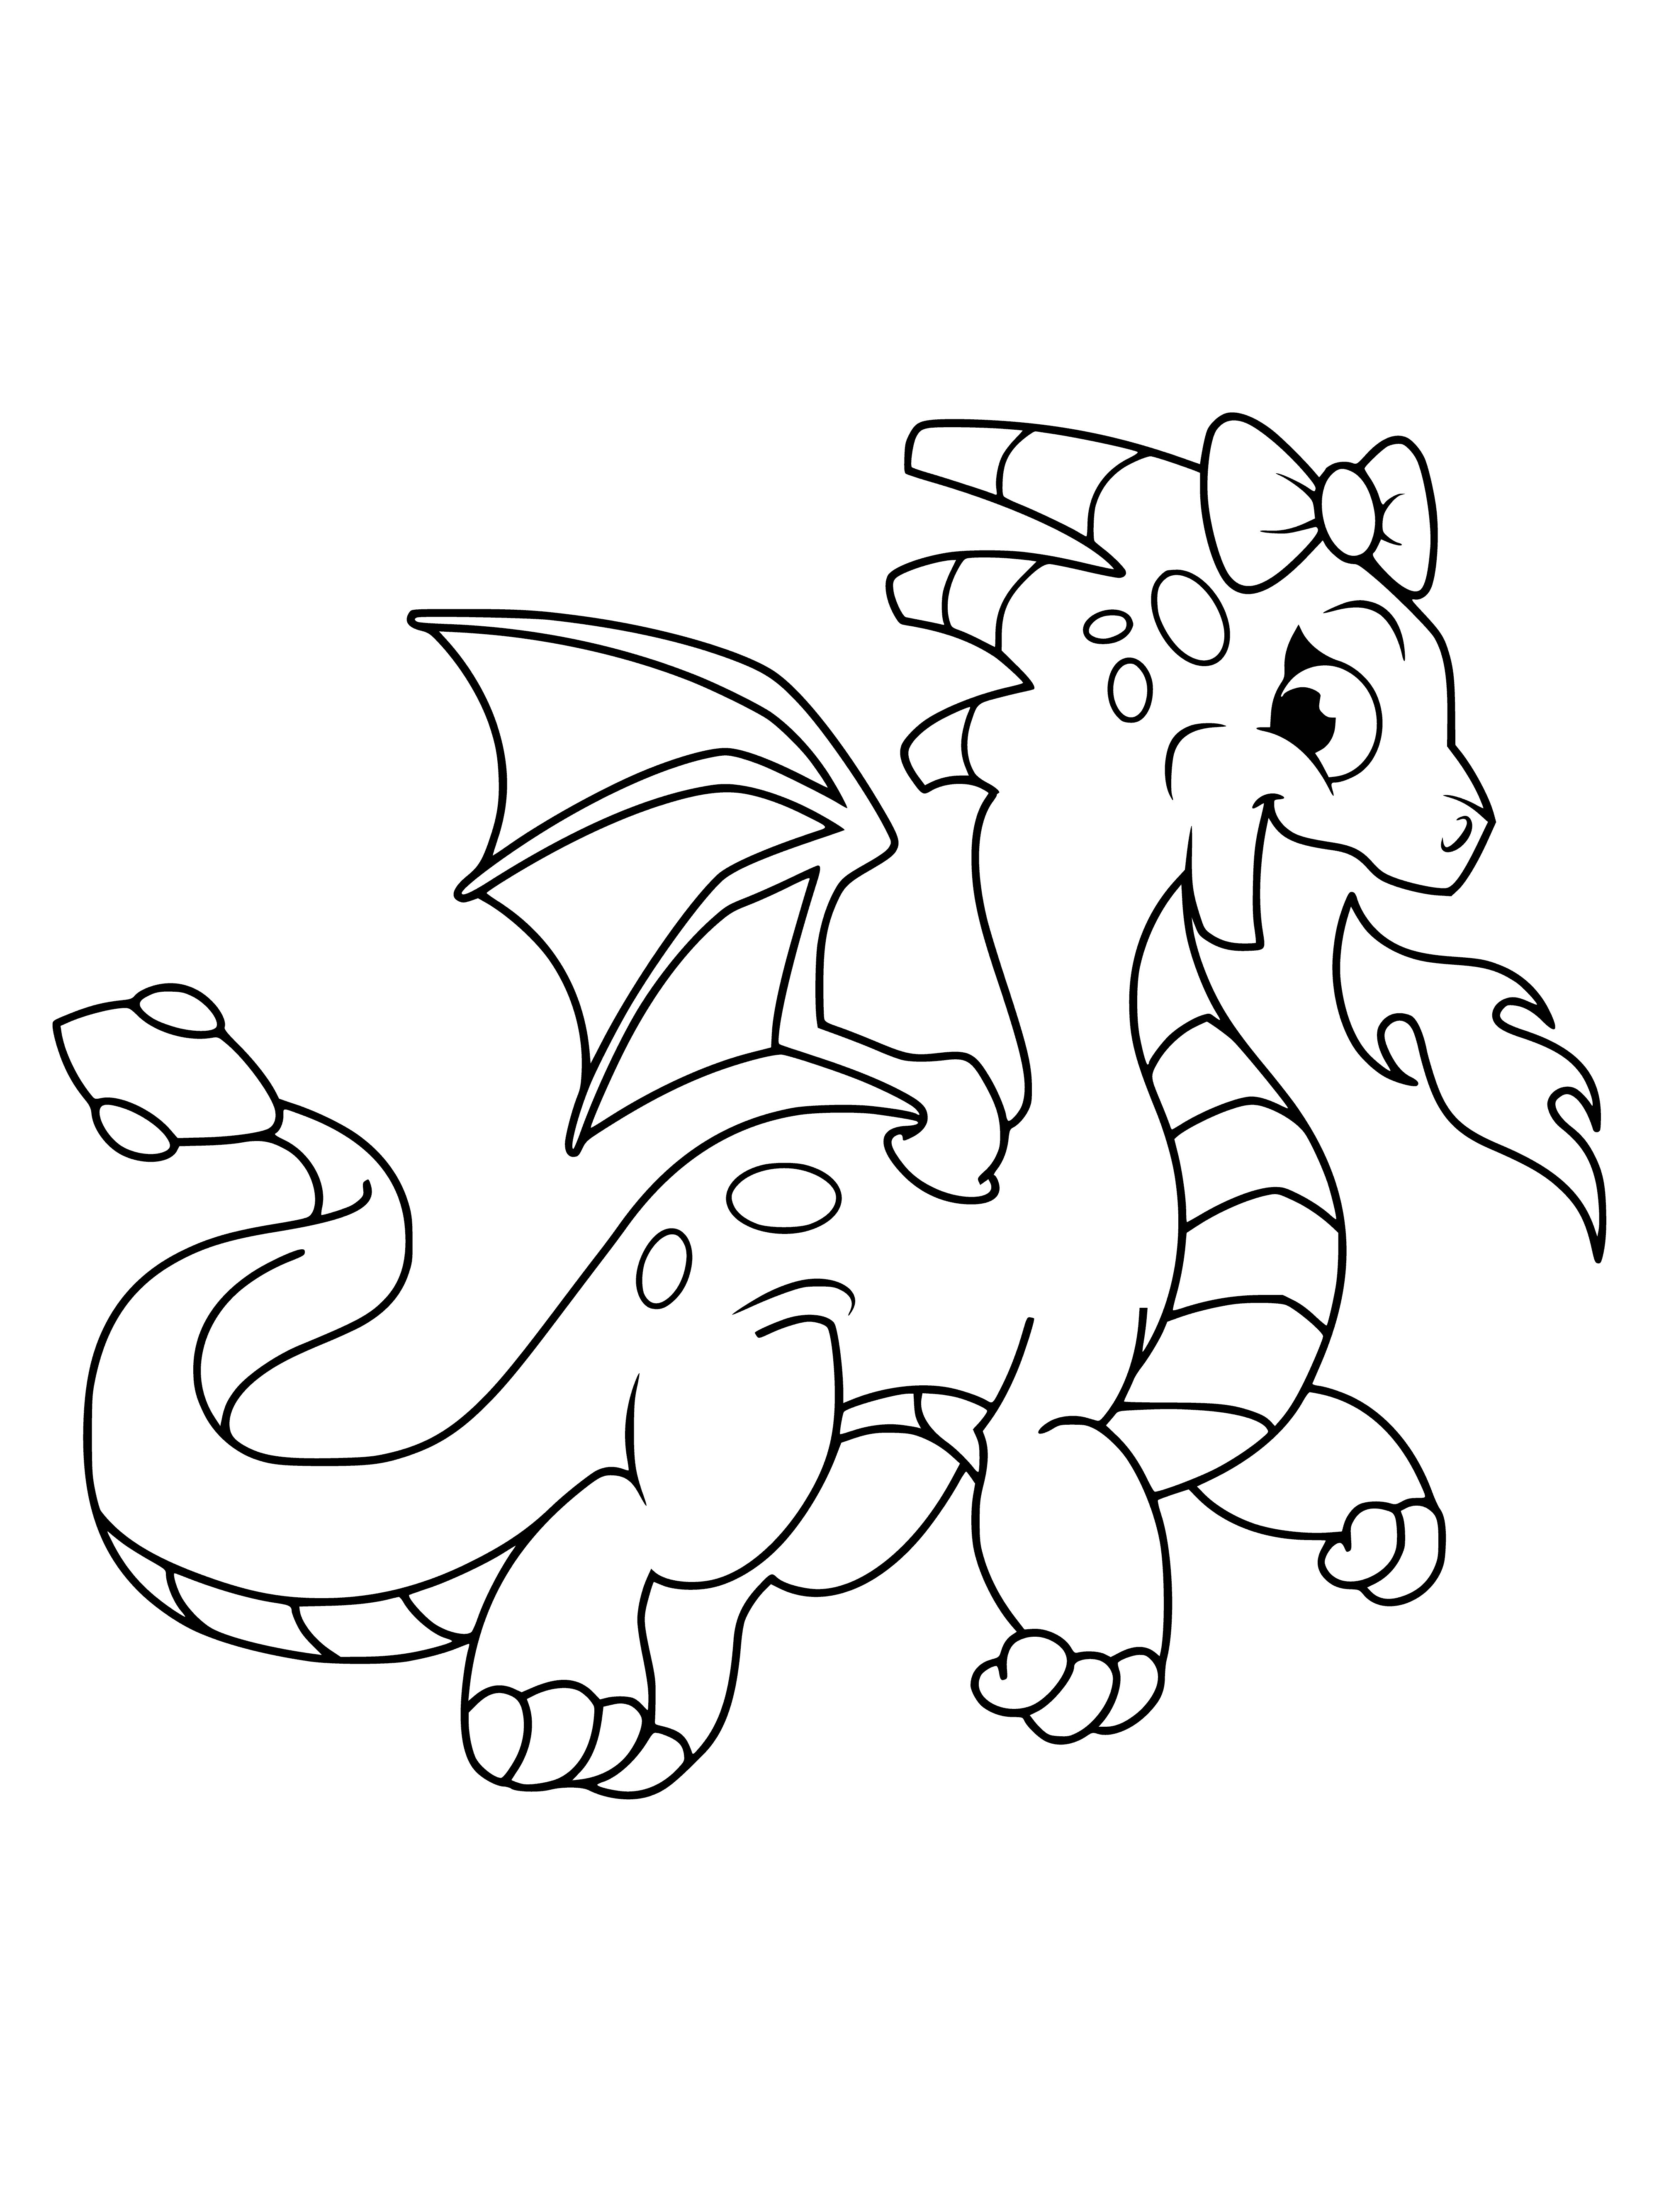 coloring page: People flee from dragon's ferocious flames!